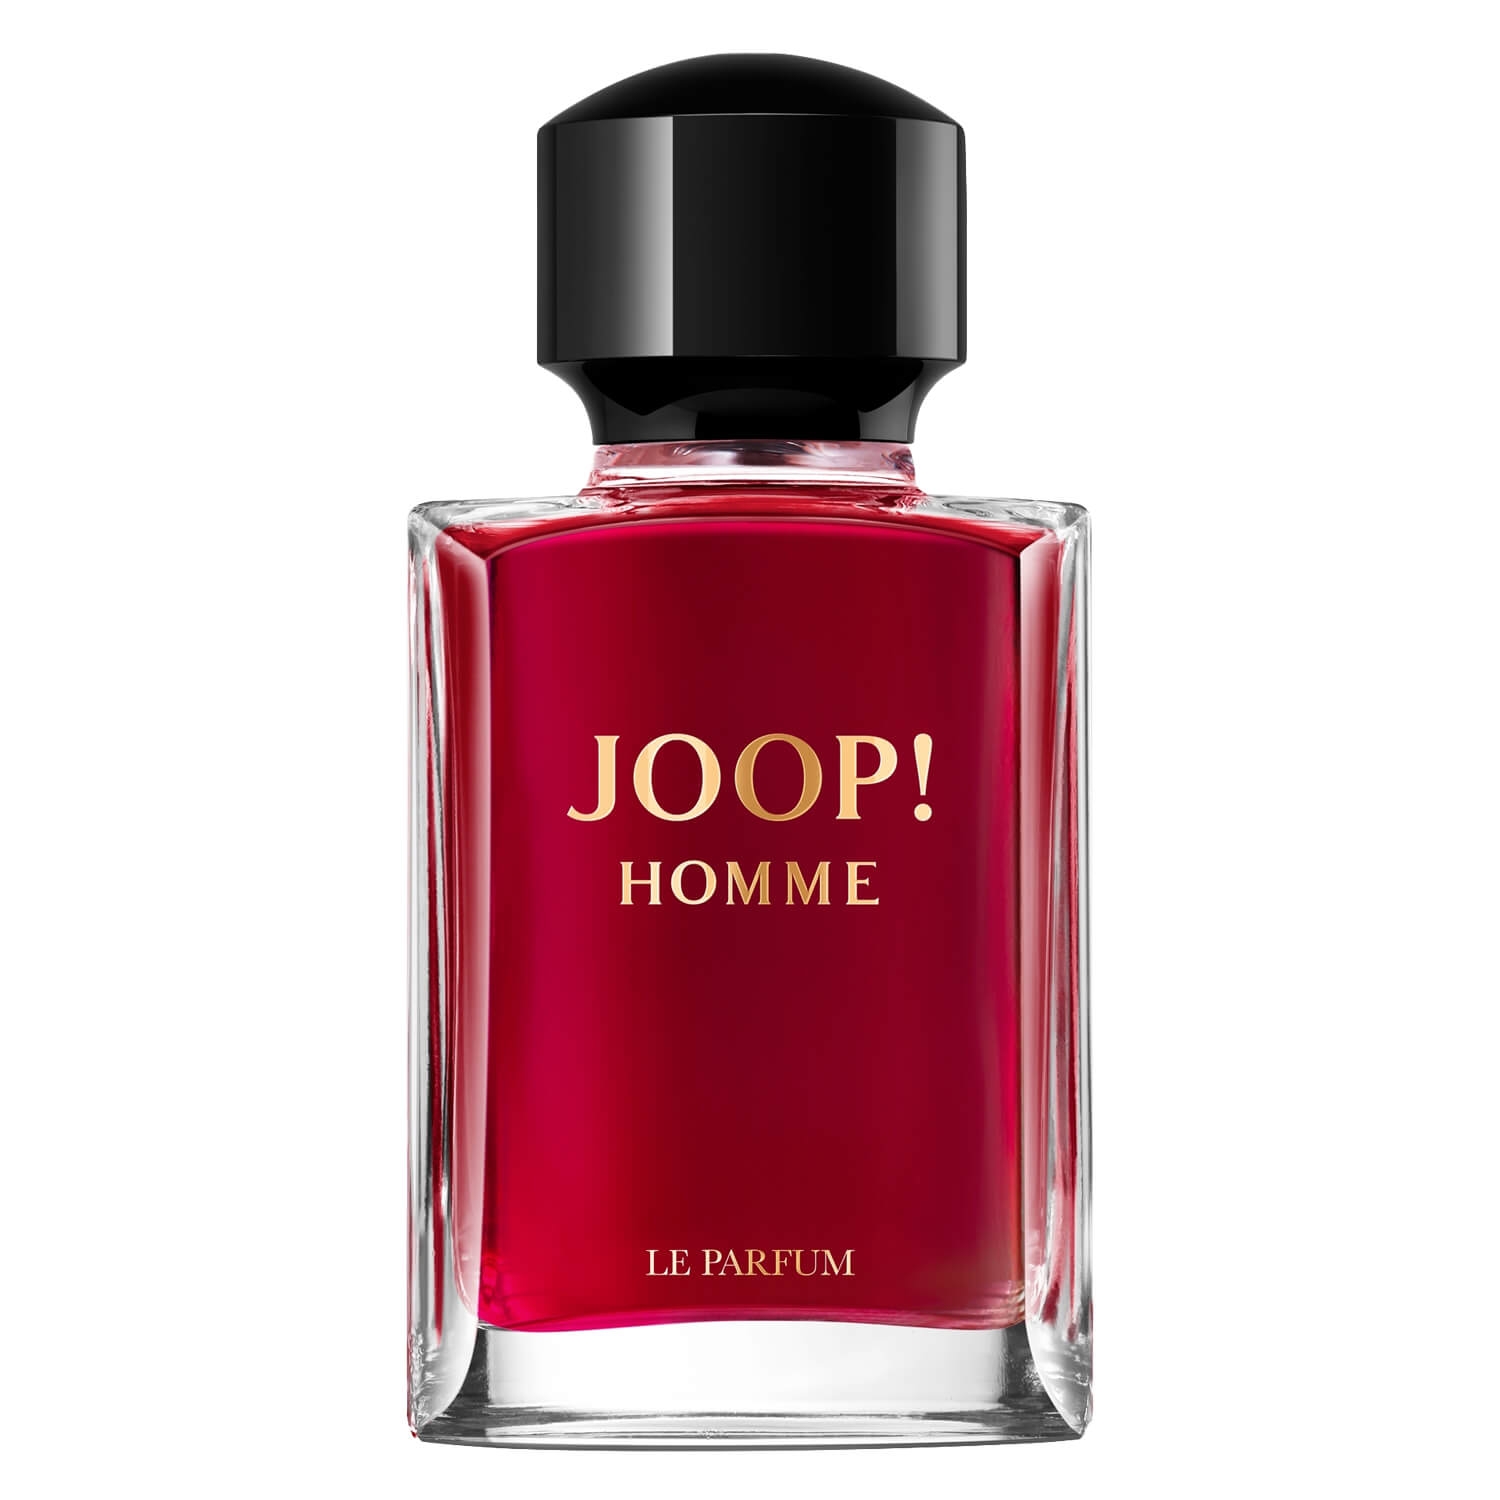 Product image from Joop! Homme - Le Parfum